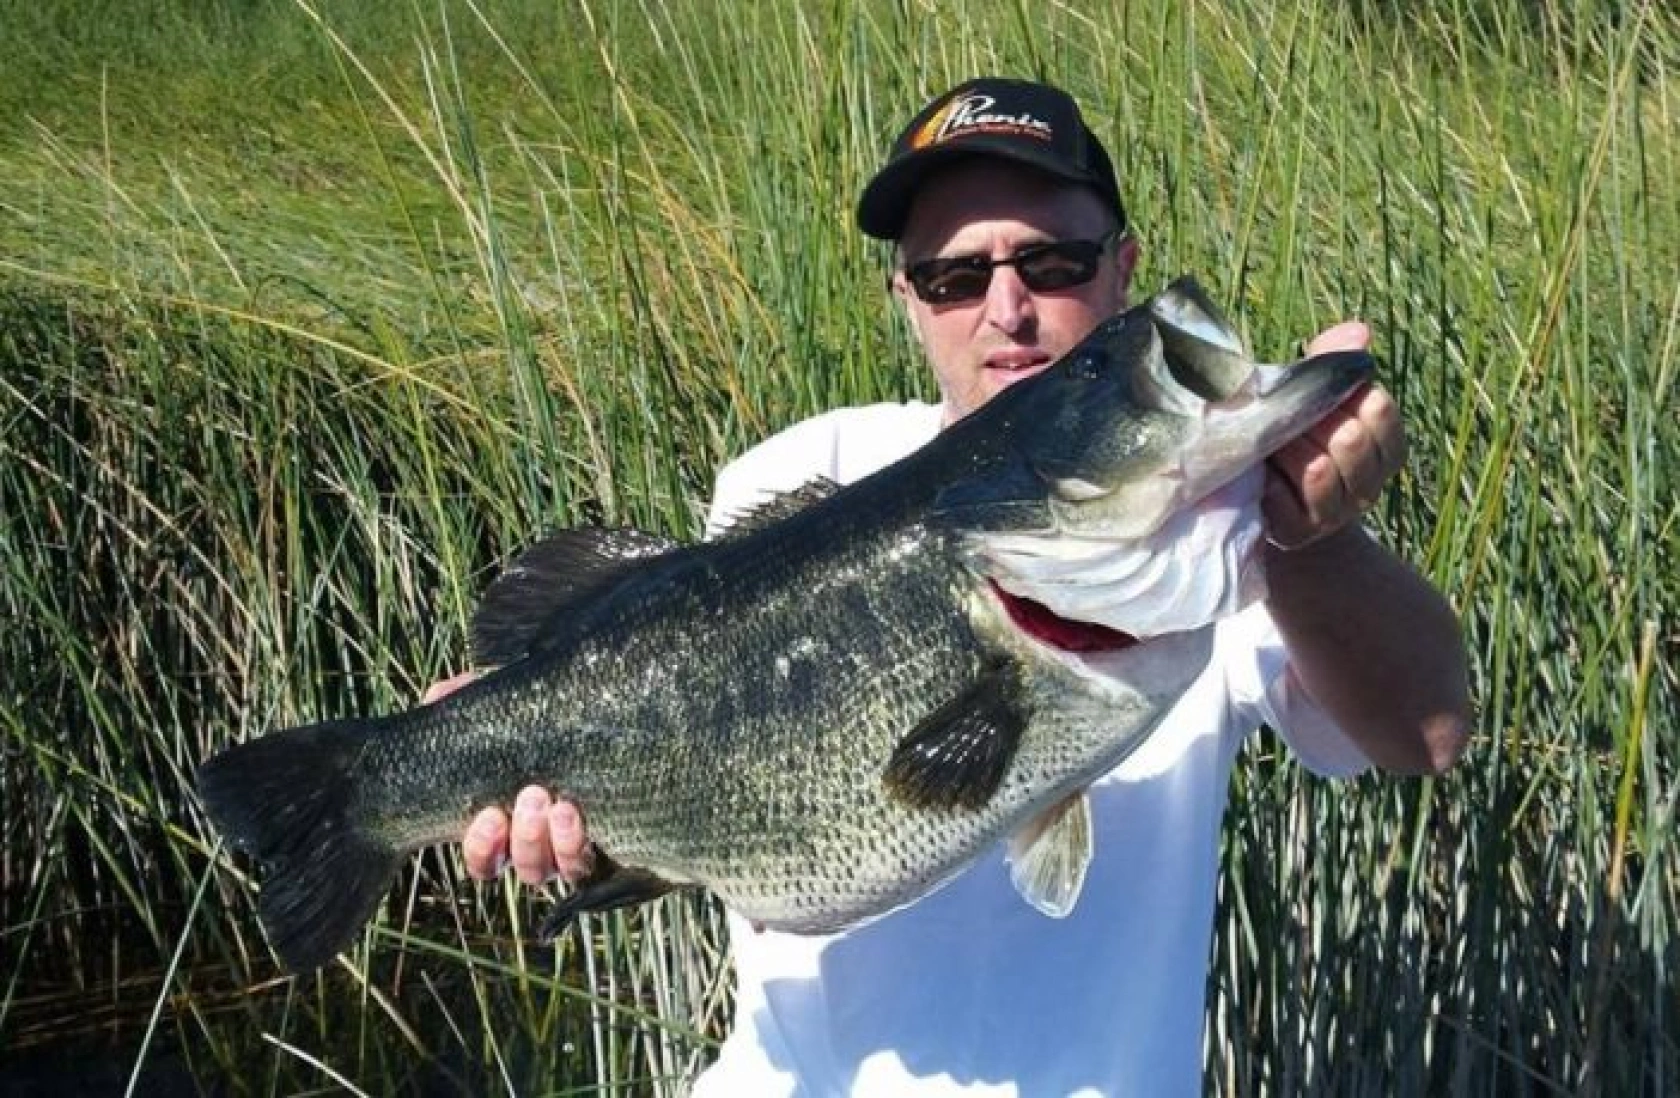 Mac Weakly caught a 25.1-pound bass.